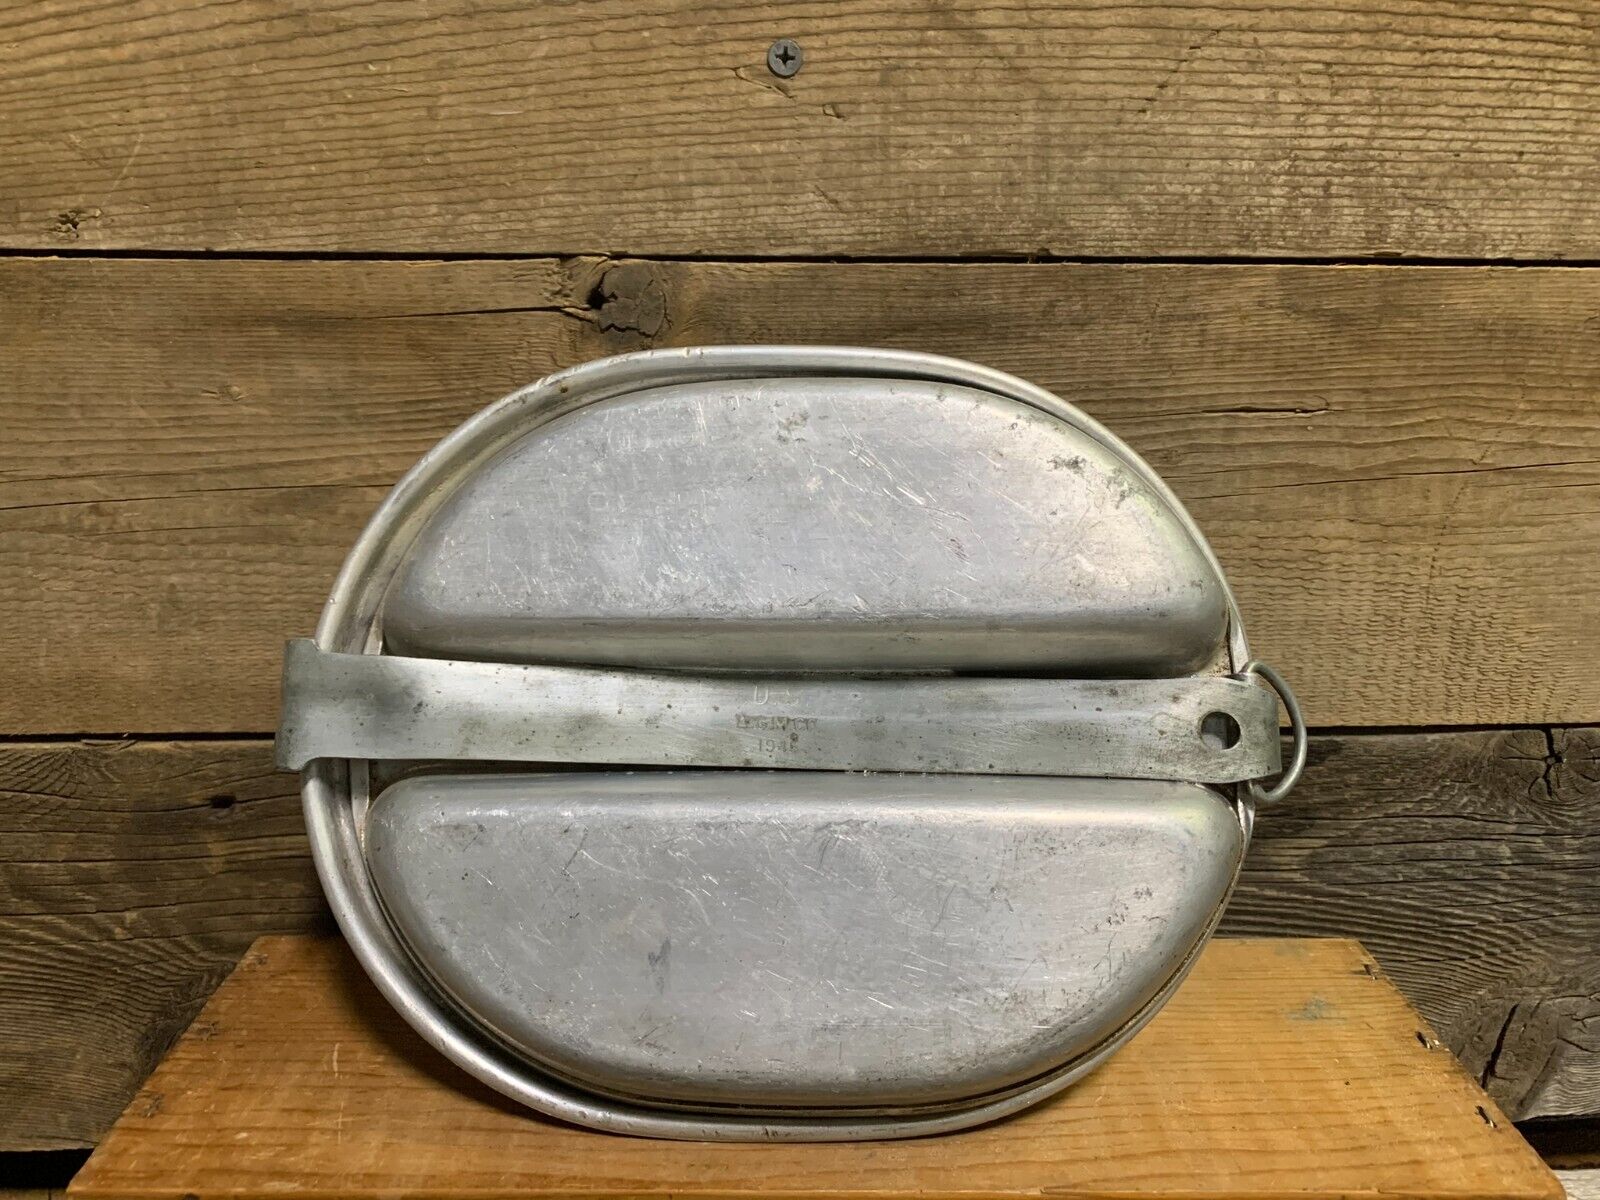 1945 U.S. A.G.M. Co., Mess Kit, WWII